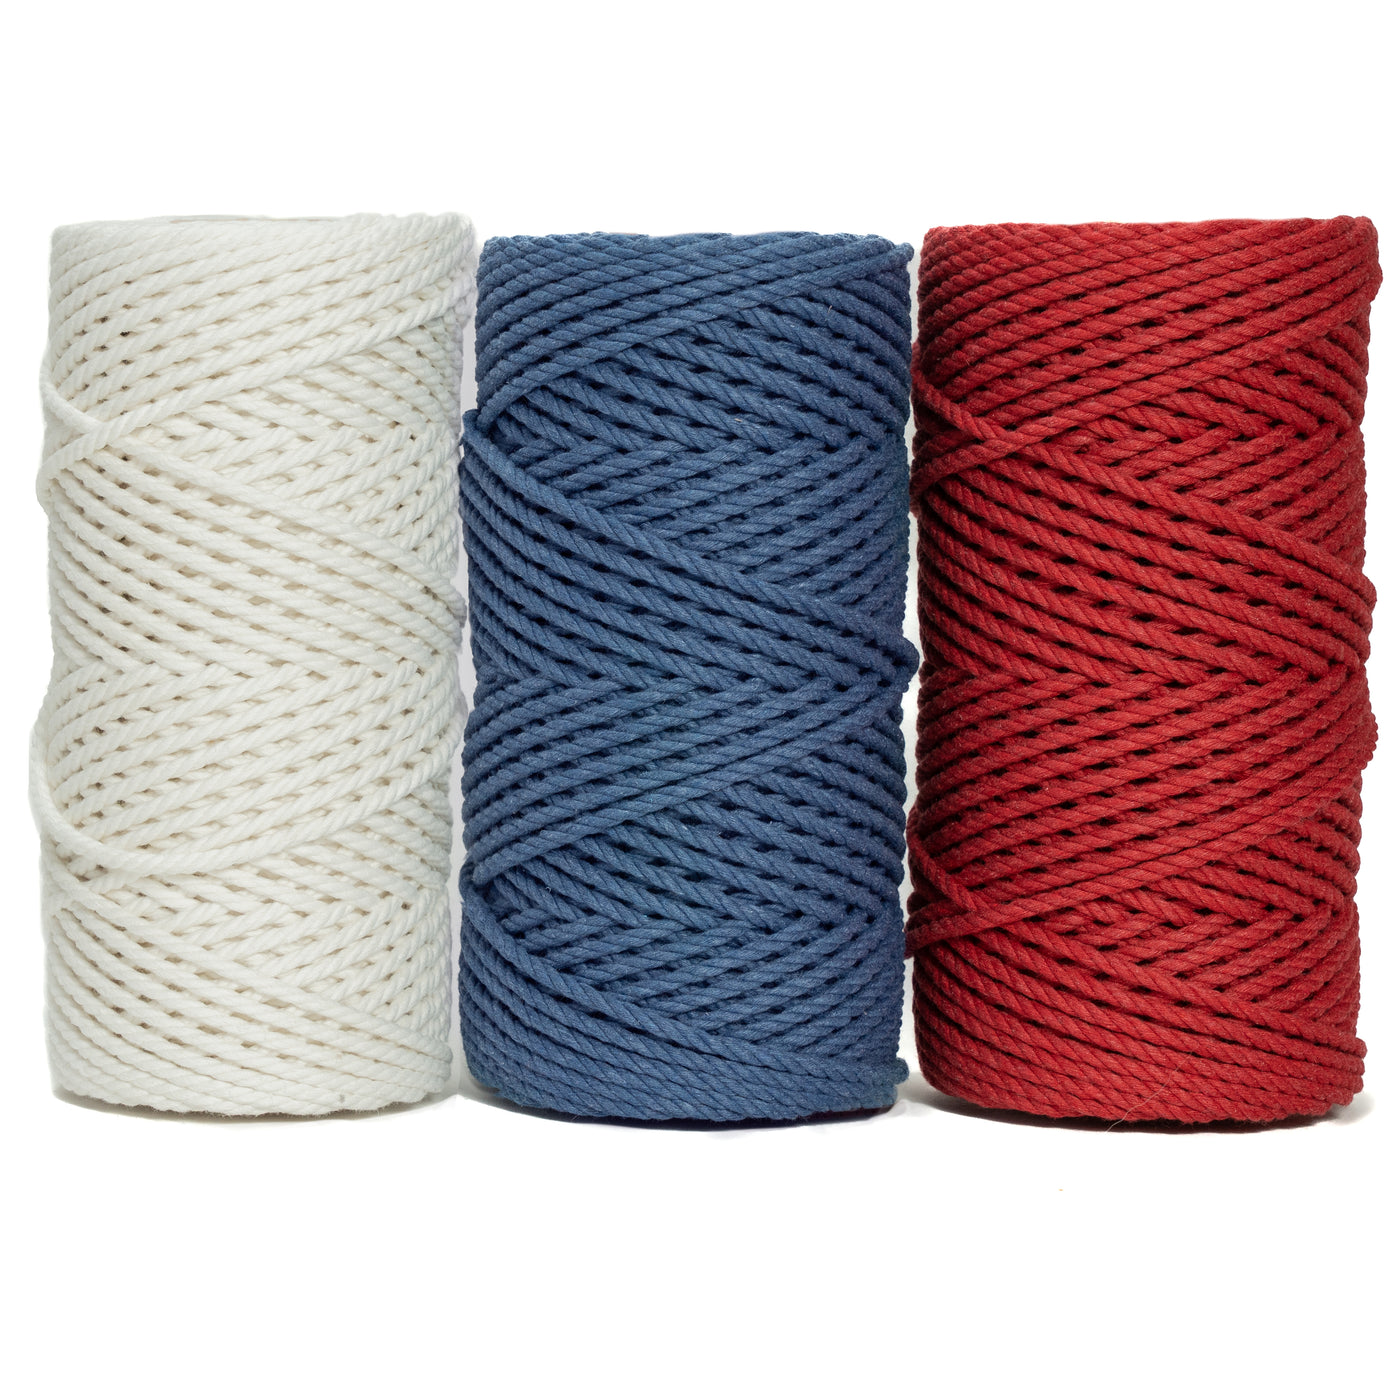 4th of July Bundle - Cotton Rope Zero Waste 3mm - 3ply